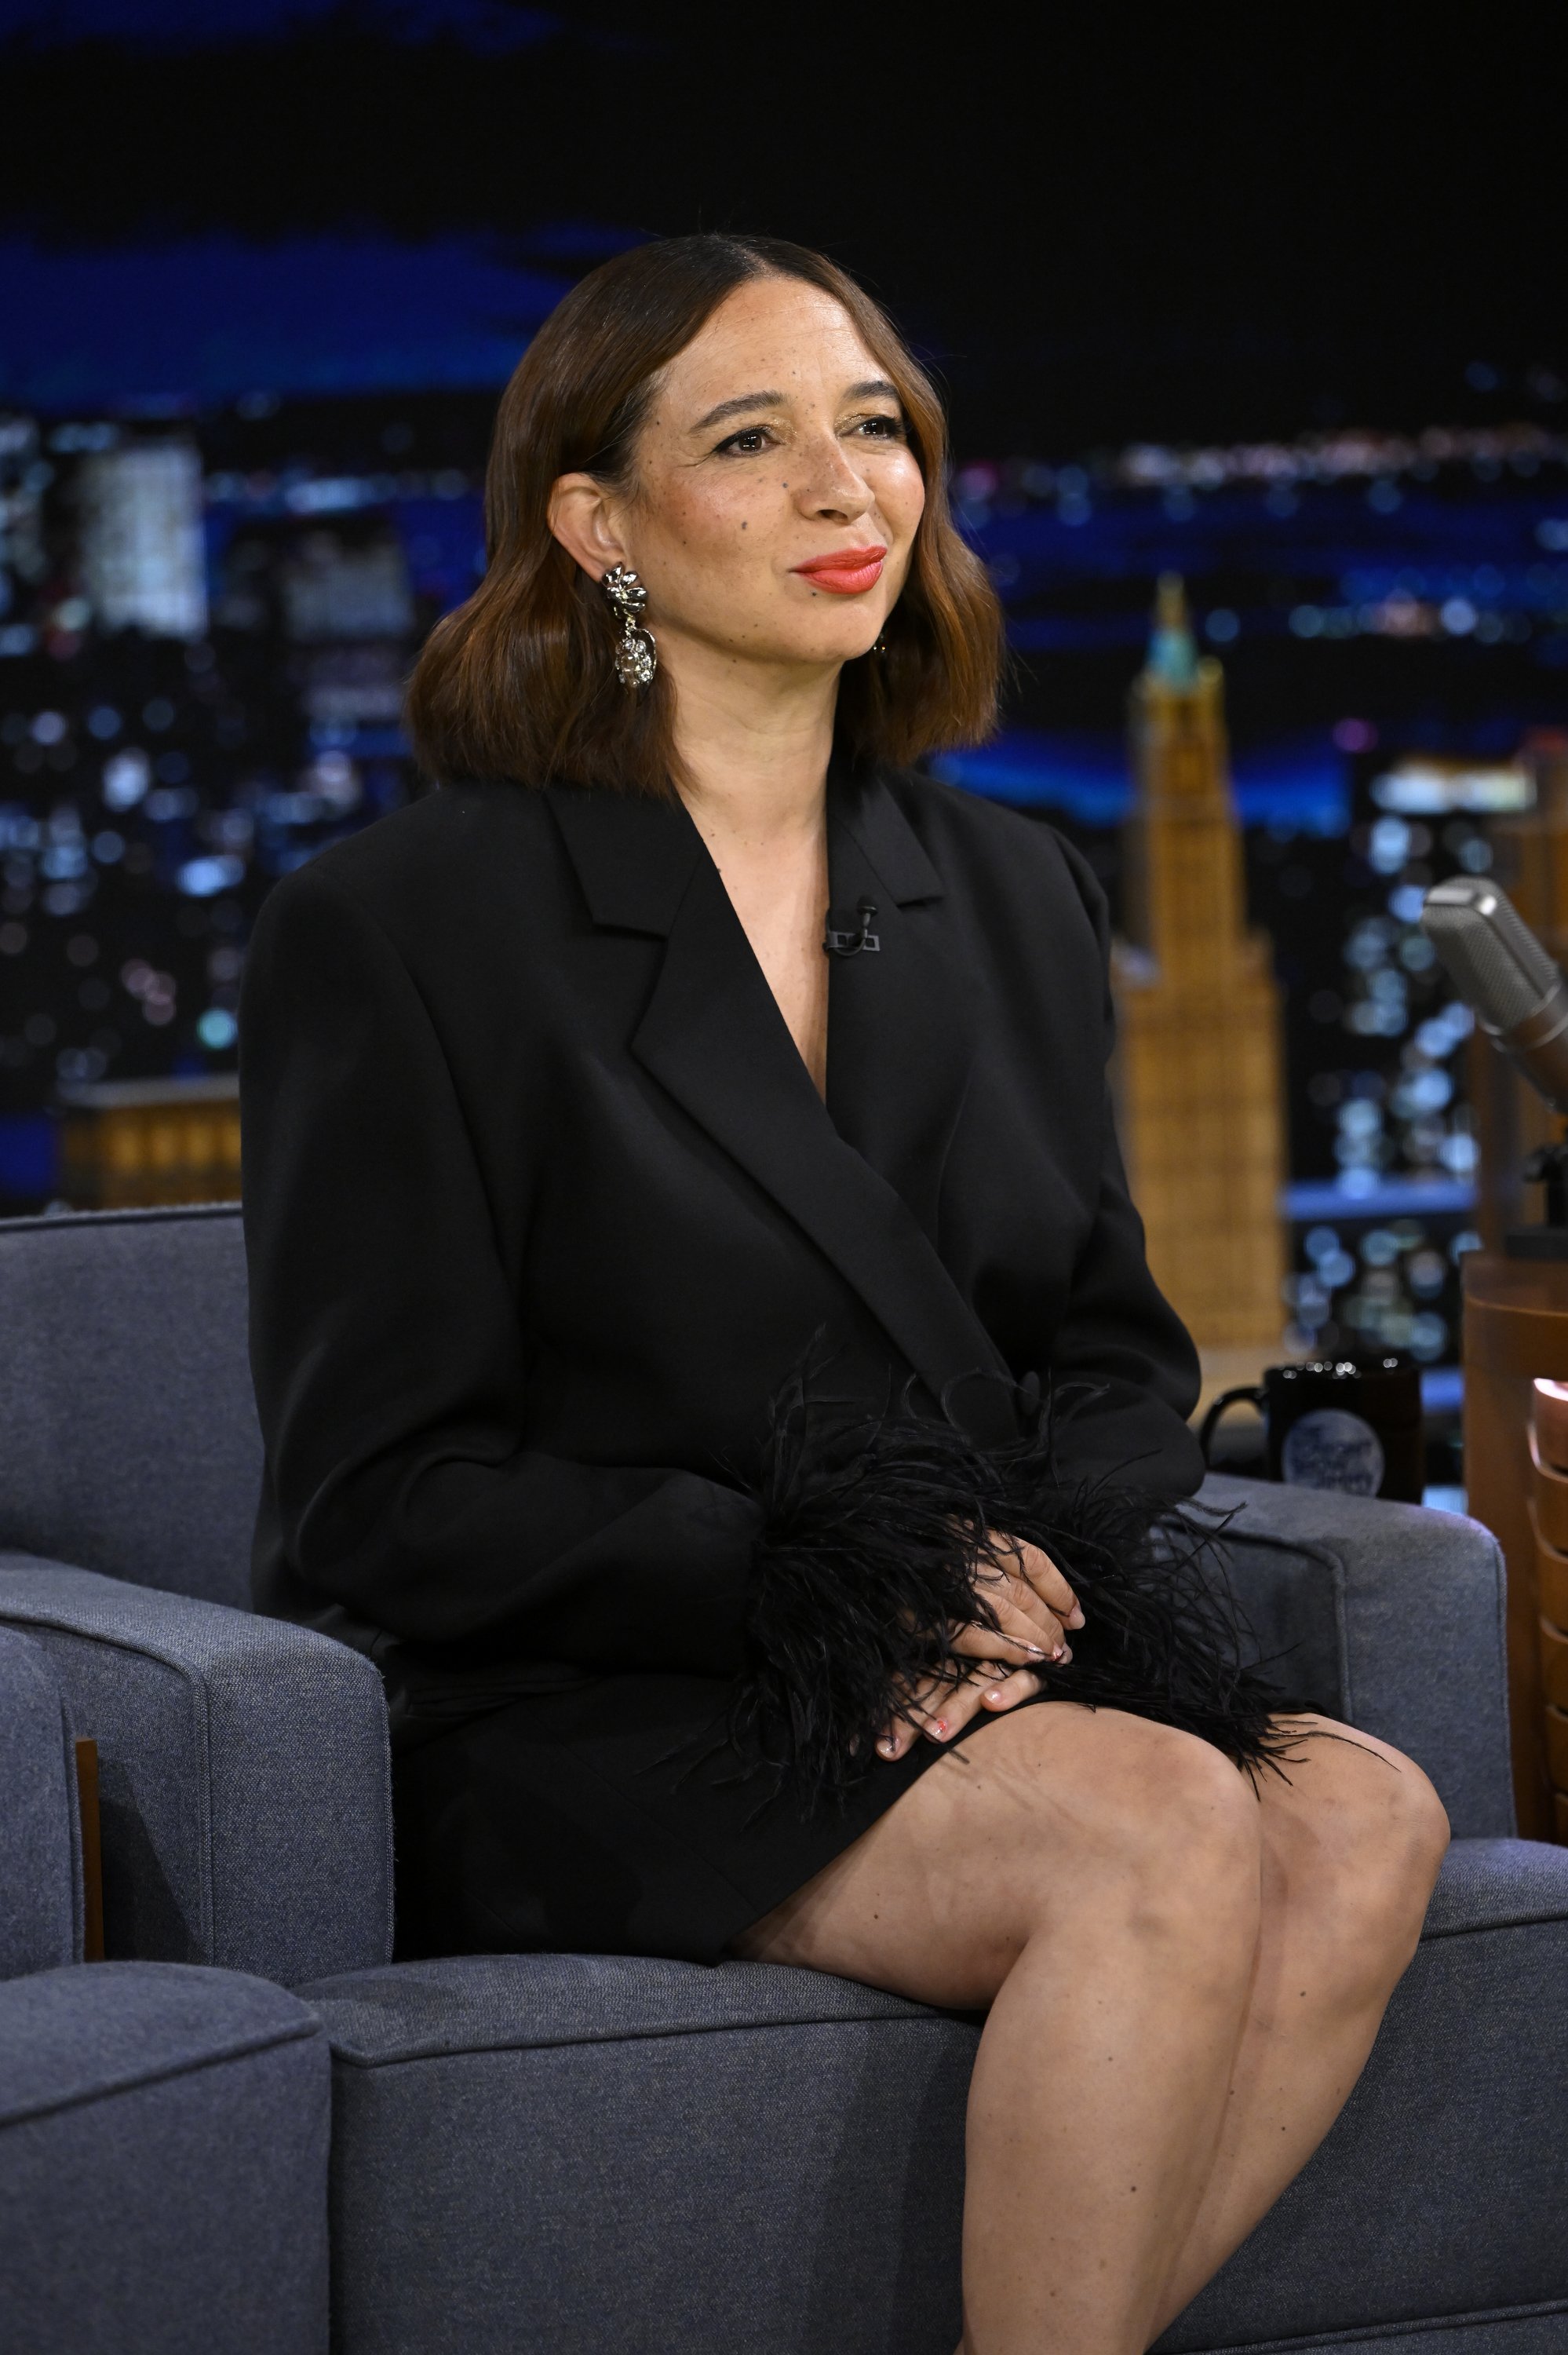 Maya Rudolph on "The Tonight Show Starring Jimmy Fallon" on June 22, 2022 | Source: Getty Images